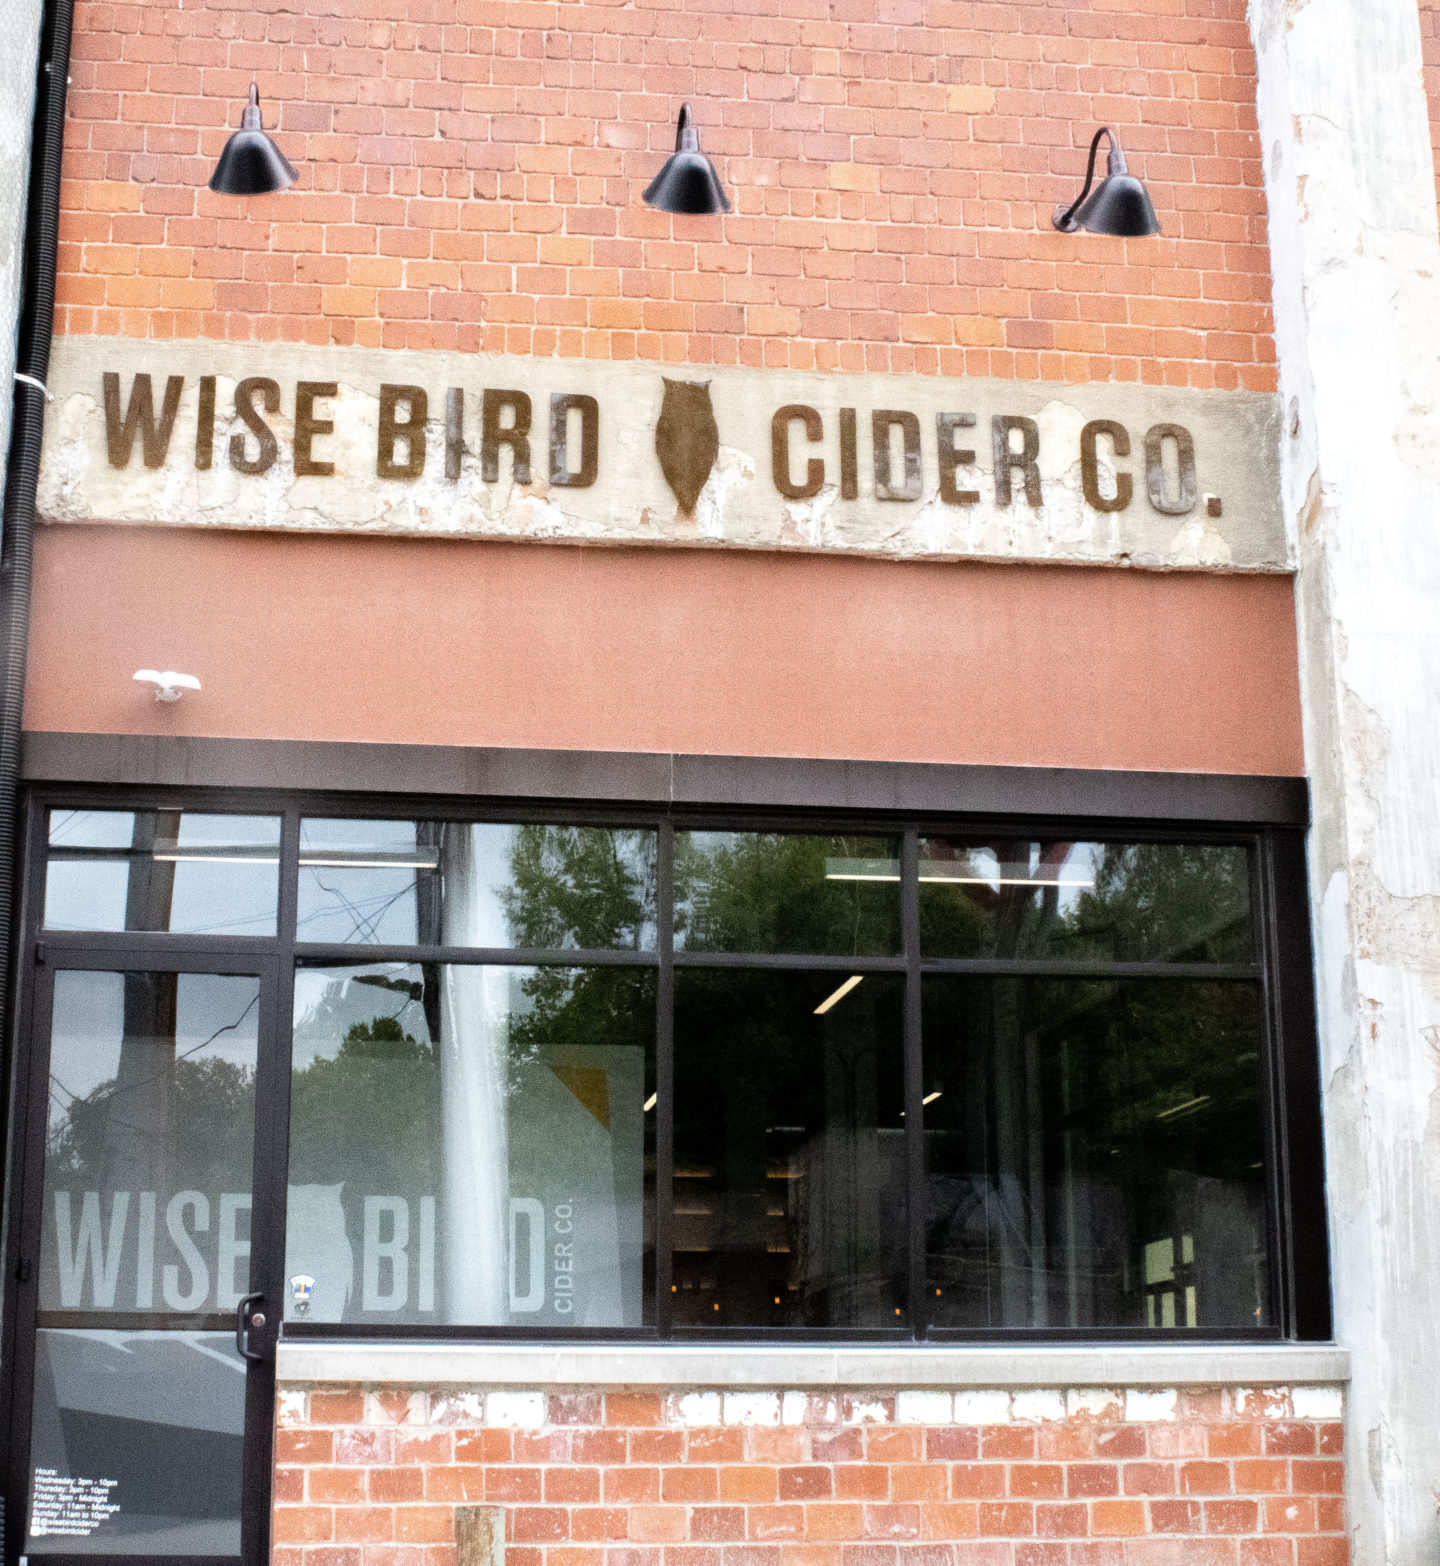 the front of a brick building with the sign wise bird cider co